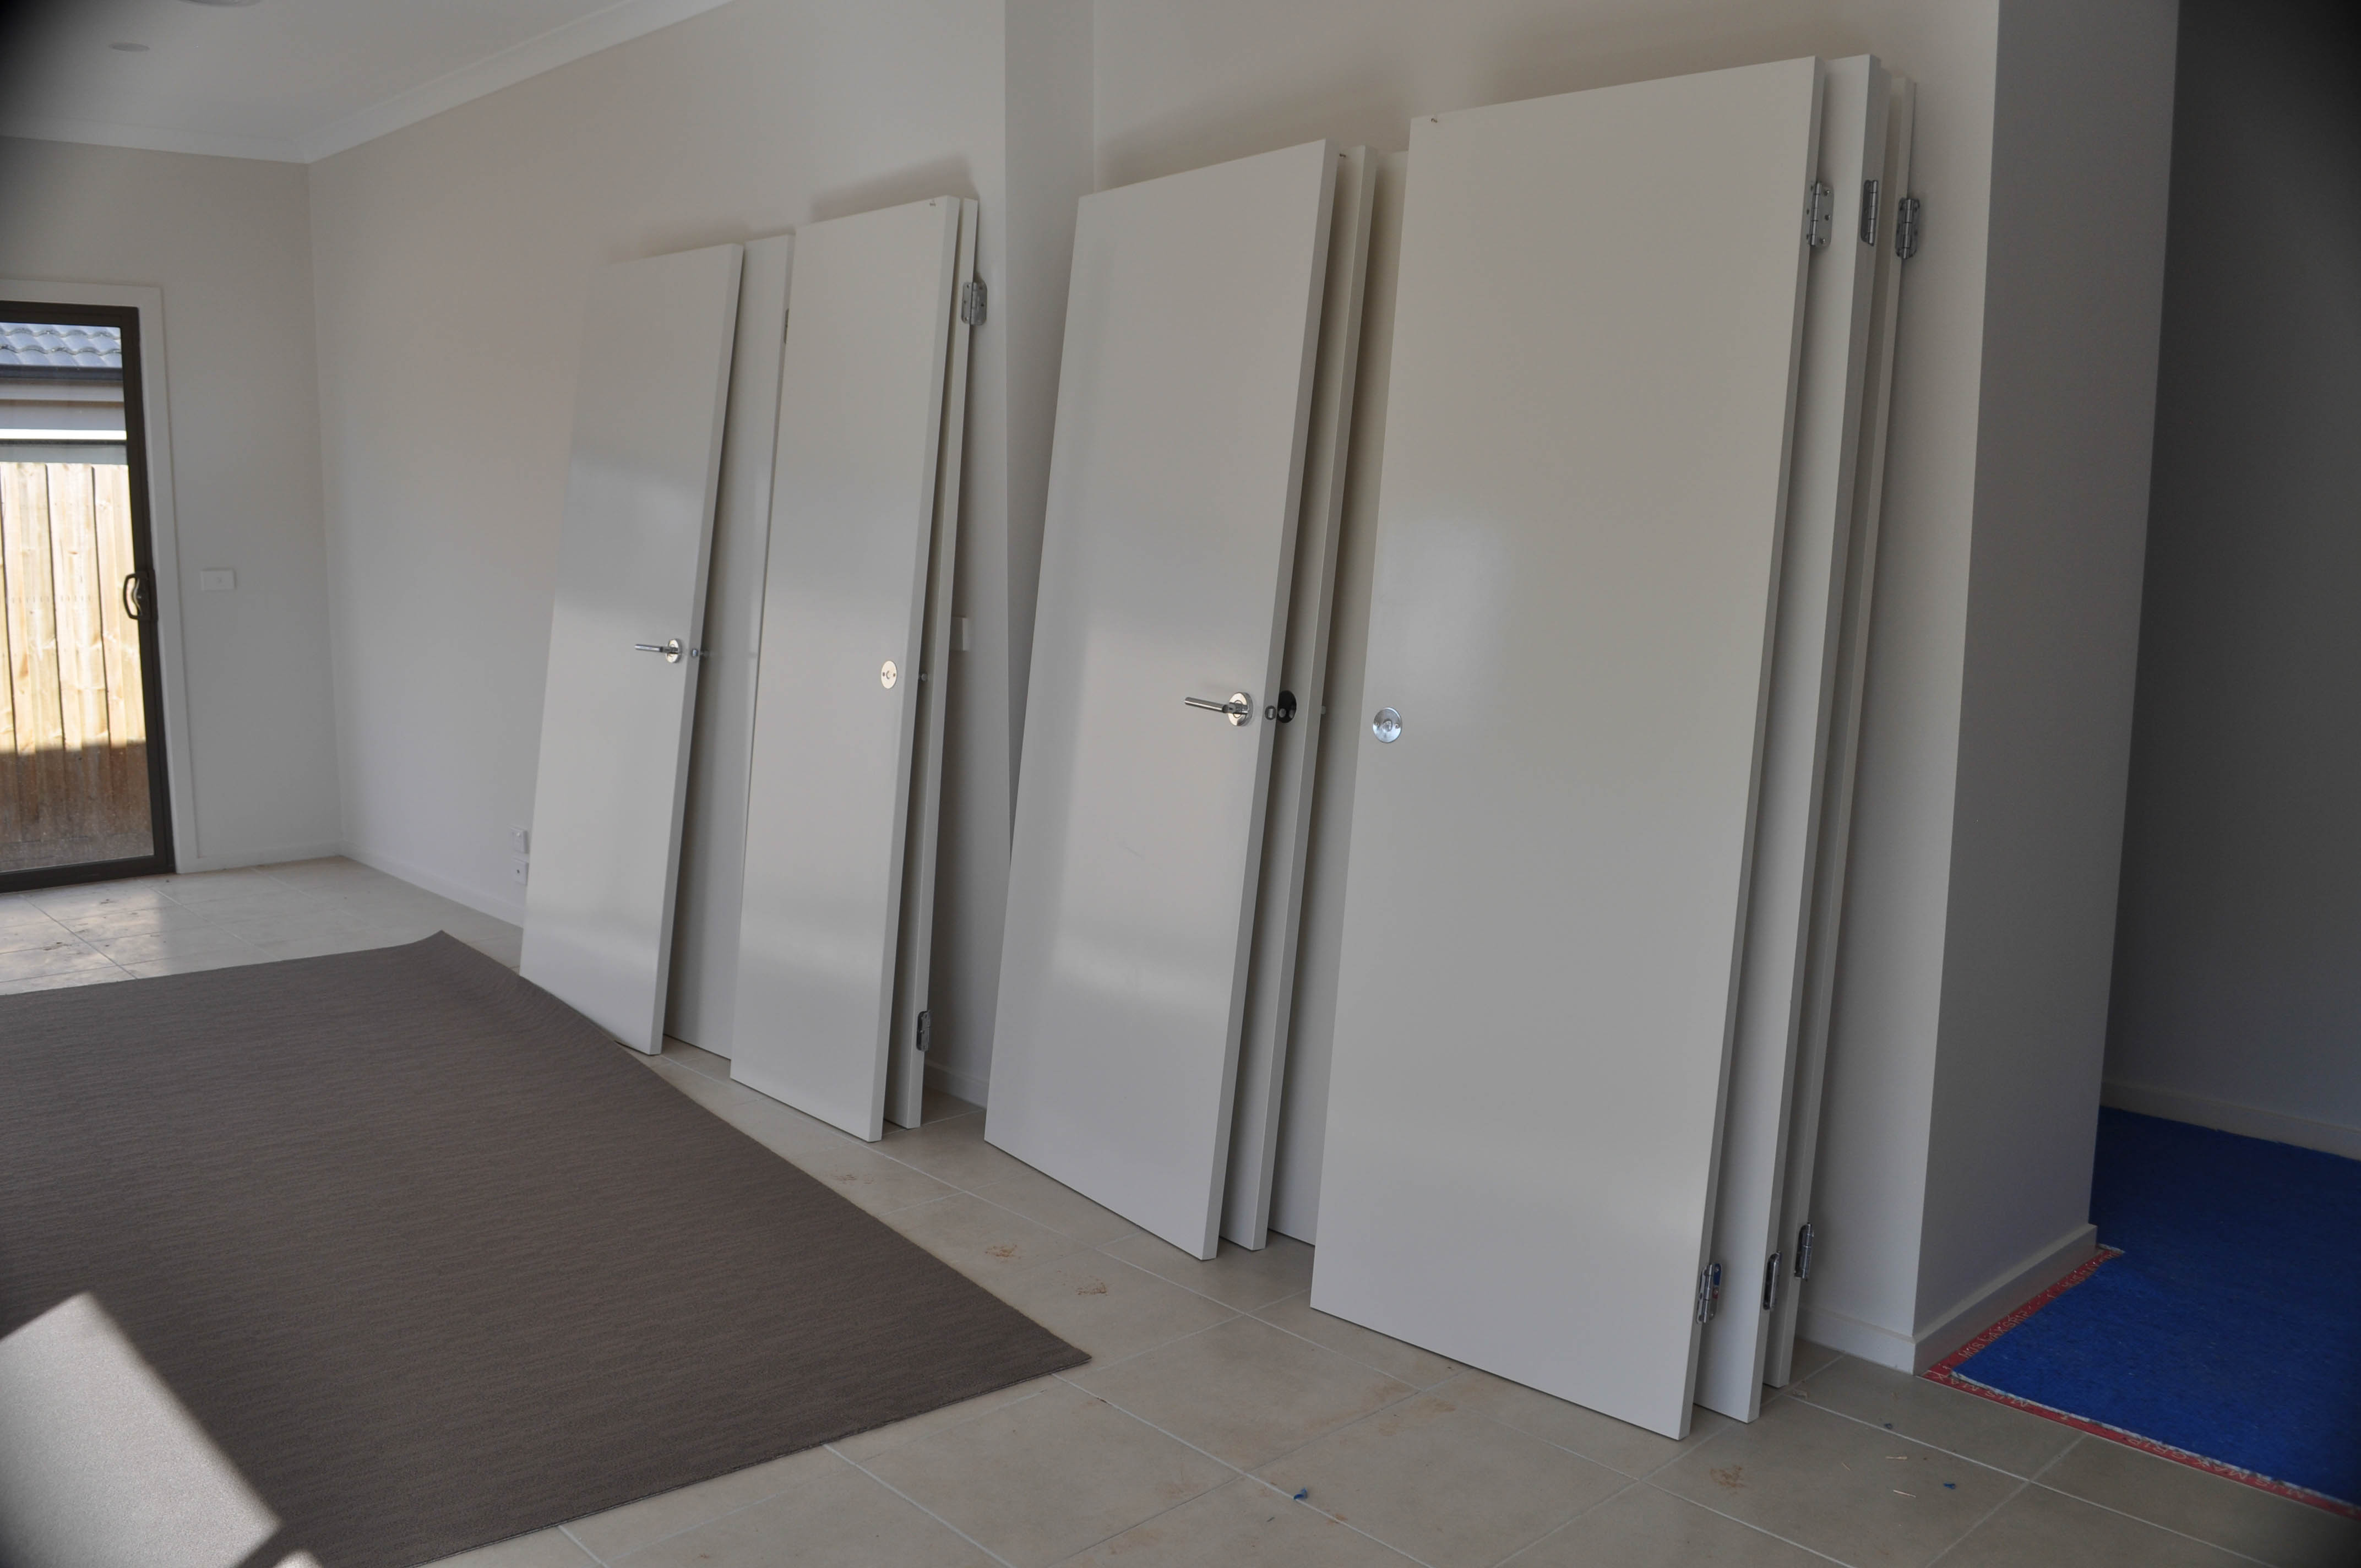 showing a dining room with 8 doors leaning against an upright wall waiting to be rehung upon completion of the carpet installation process.
The home is in Hoppers Crossing, Melbourne, Victoria 3030, Australia